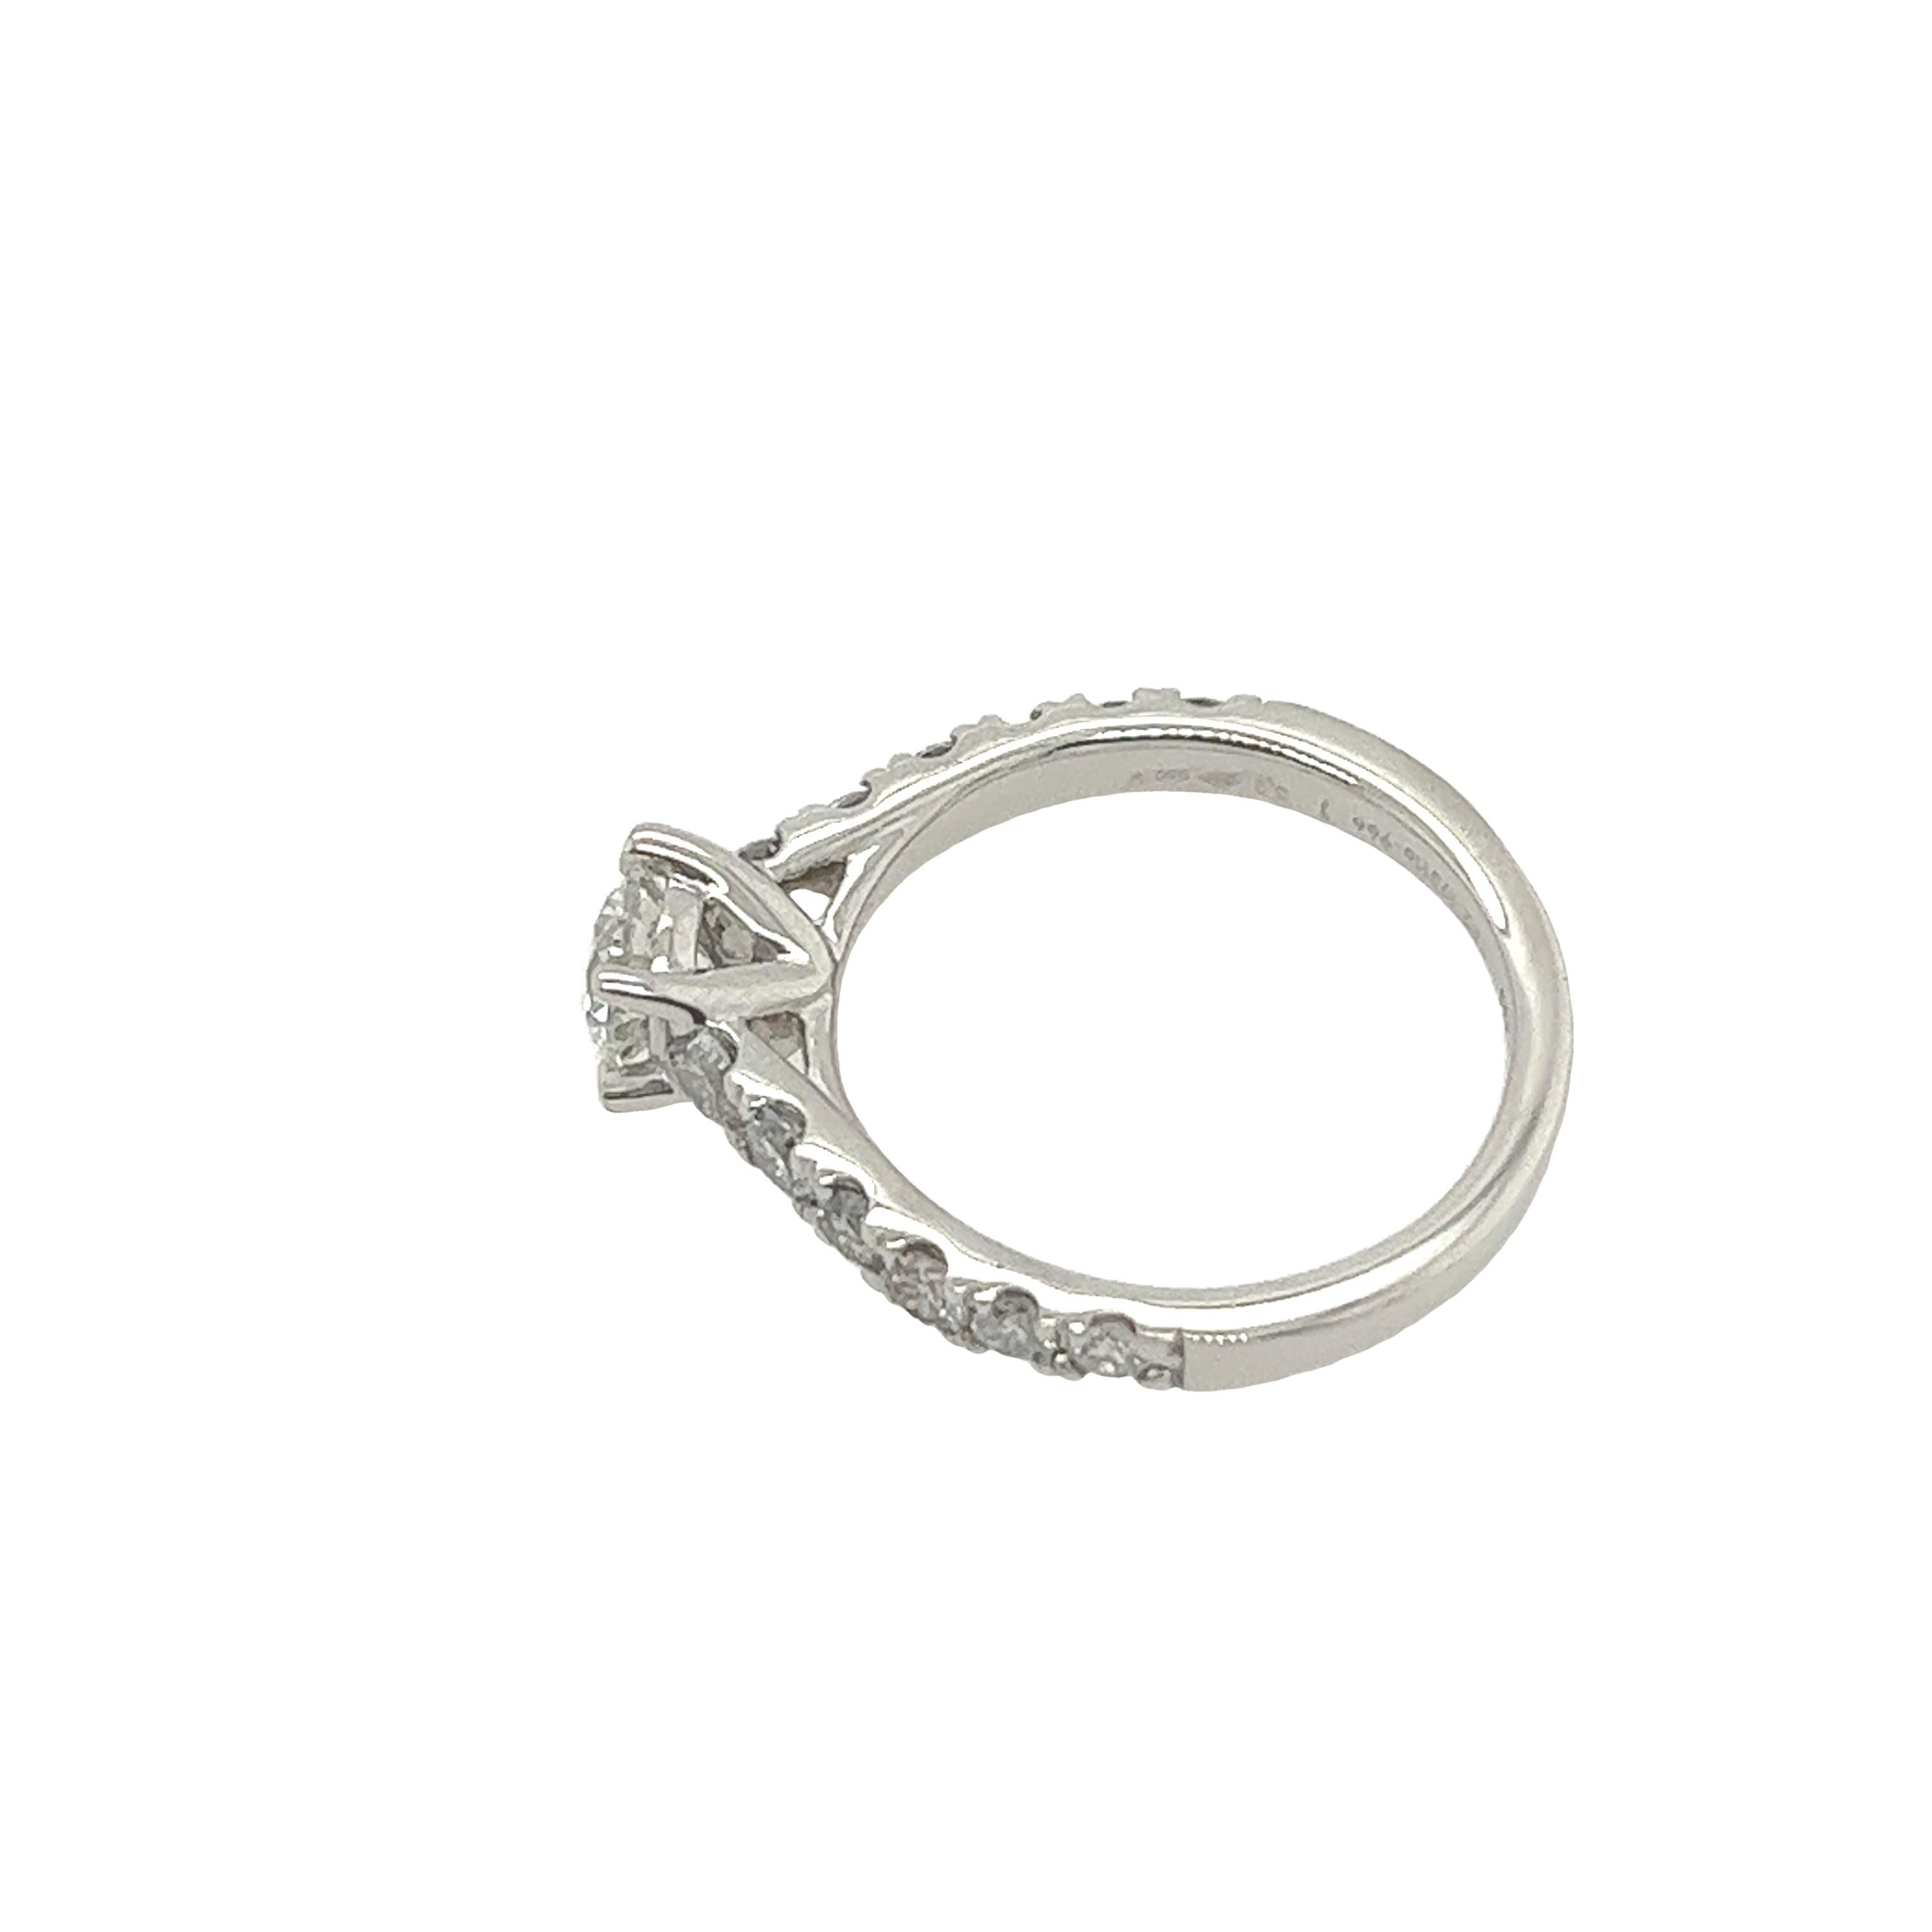 Platinum Diamond Solitaire Ring Set With 0.40ct Round Diamond & 0.62ct On Sides For Sale 1